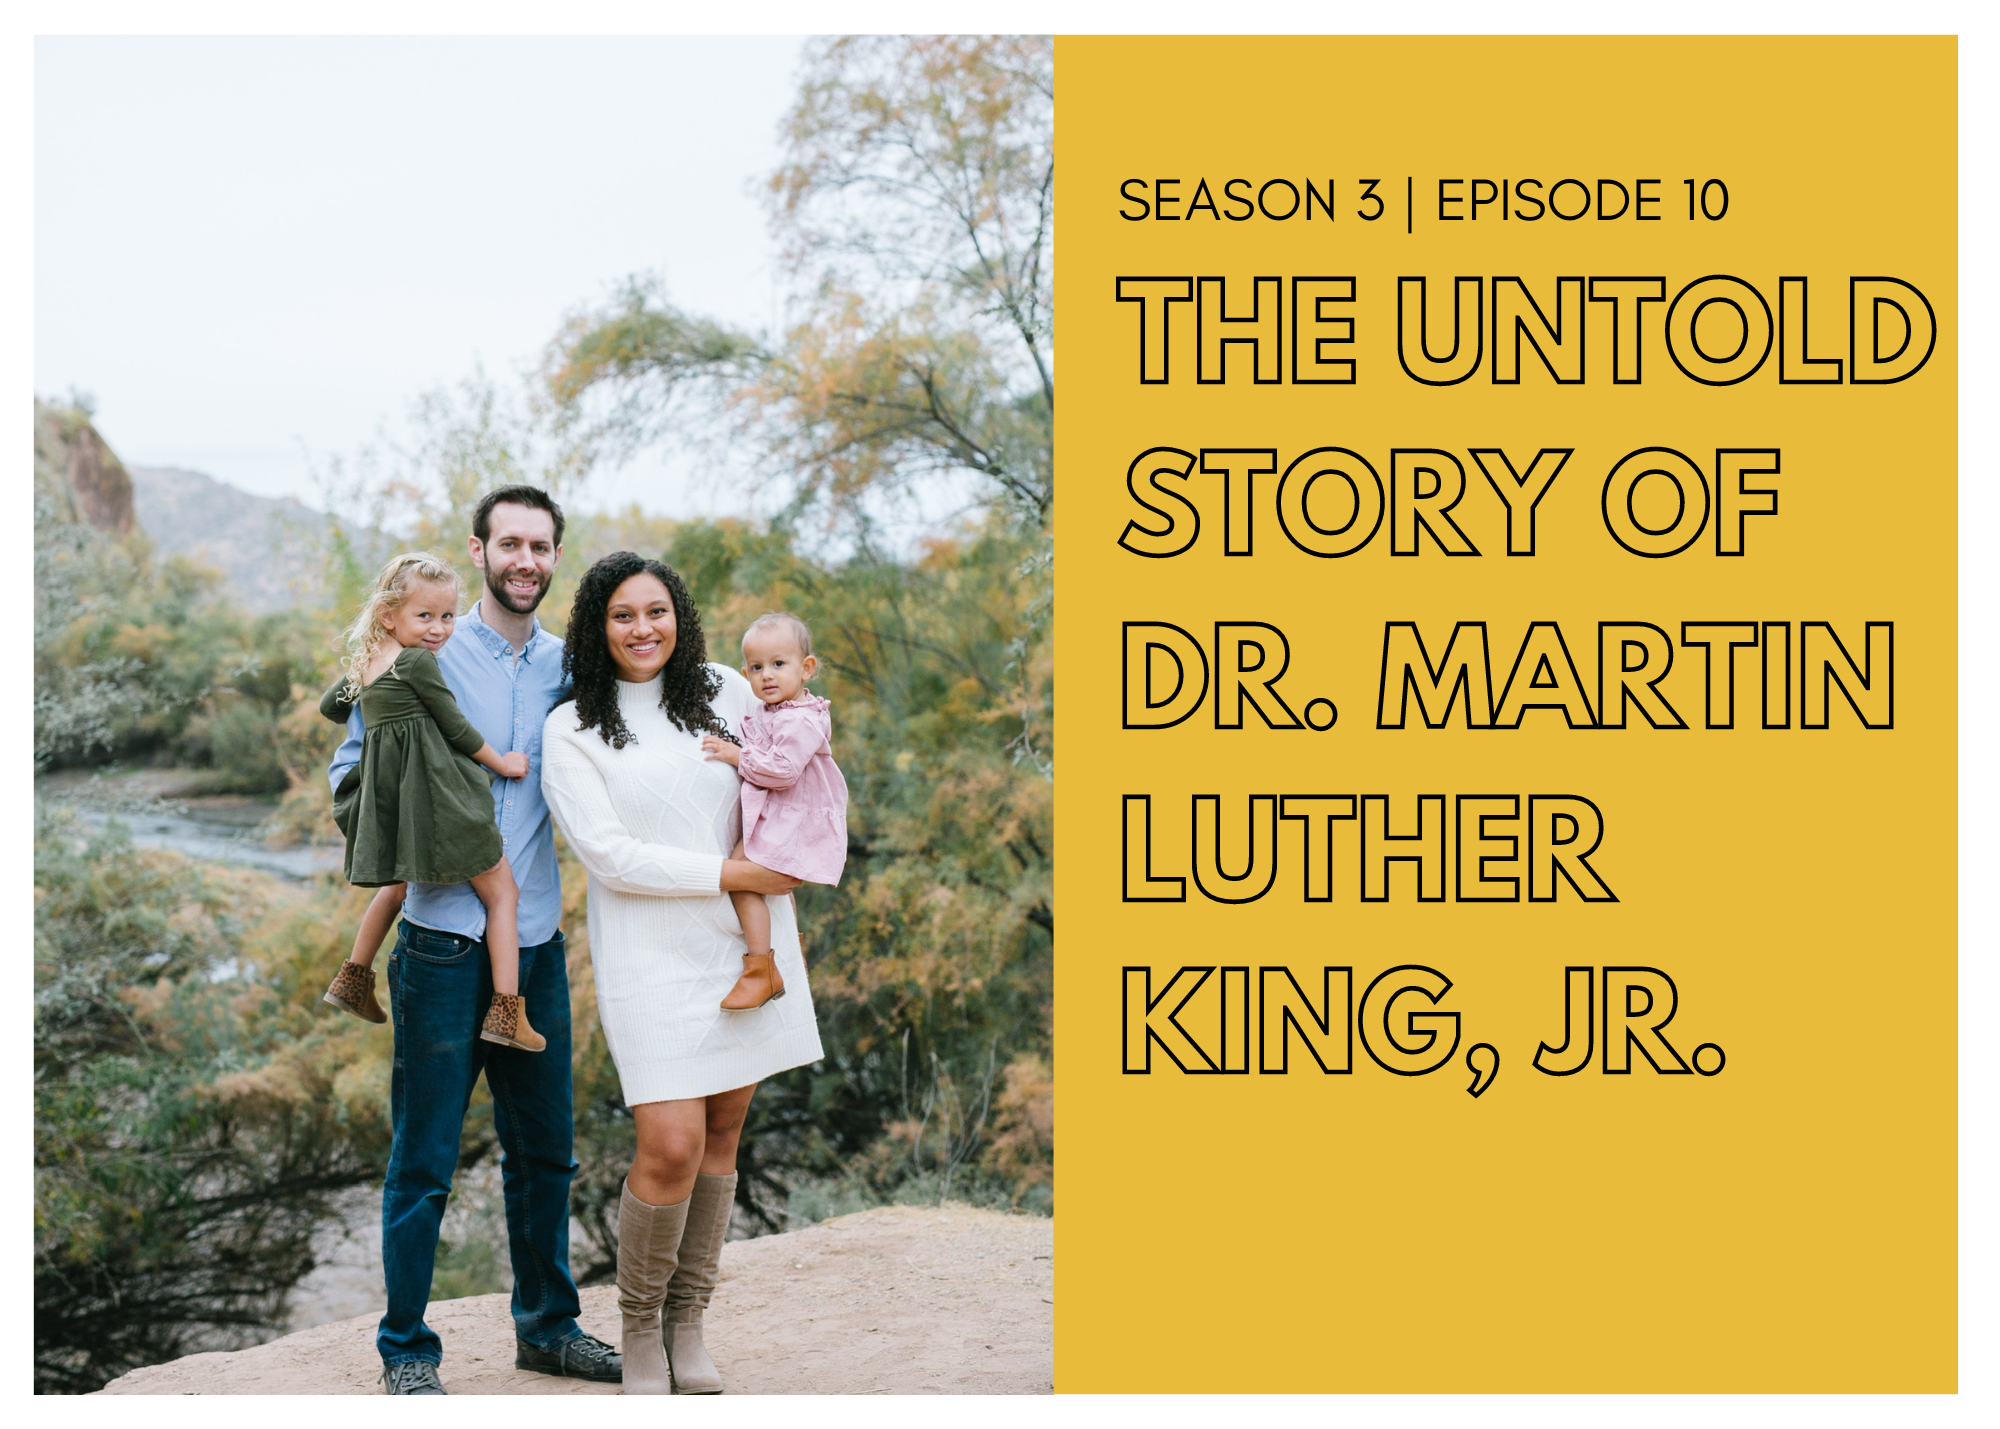 The Untold Story of Dr. Martin Luther King, Jr.